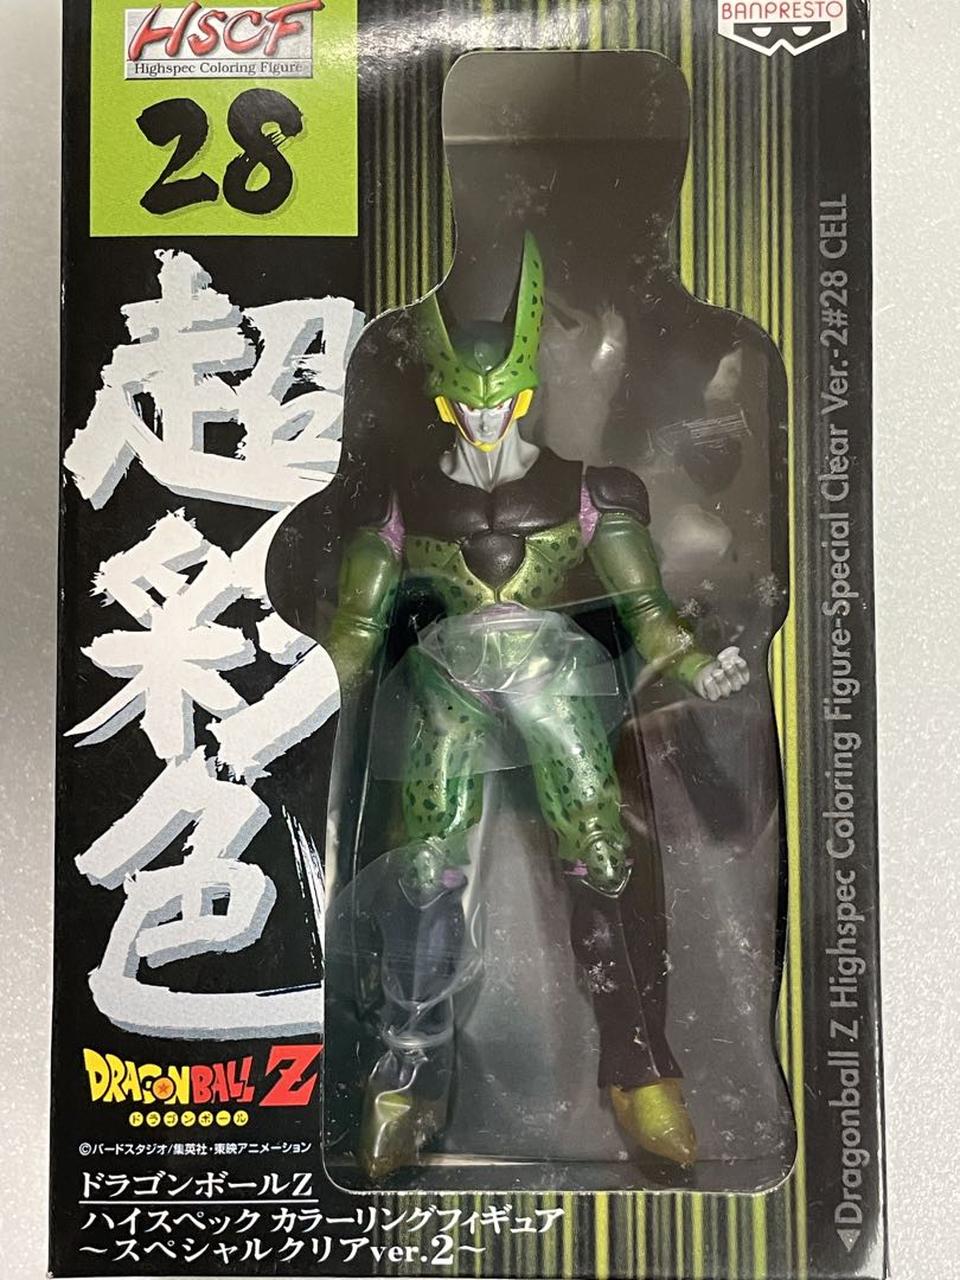 Dragon Ball Z Banpresto HSCF 28 Cell Highspec Coloring Figure Special Clear  Ver.